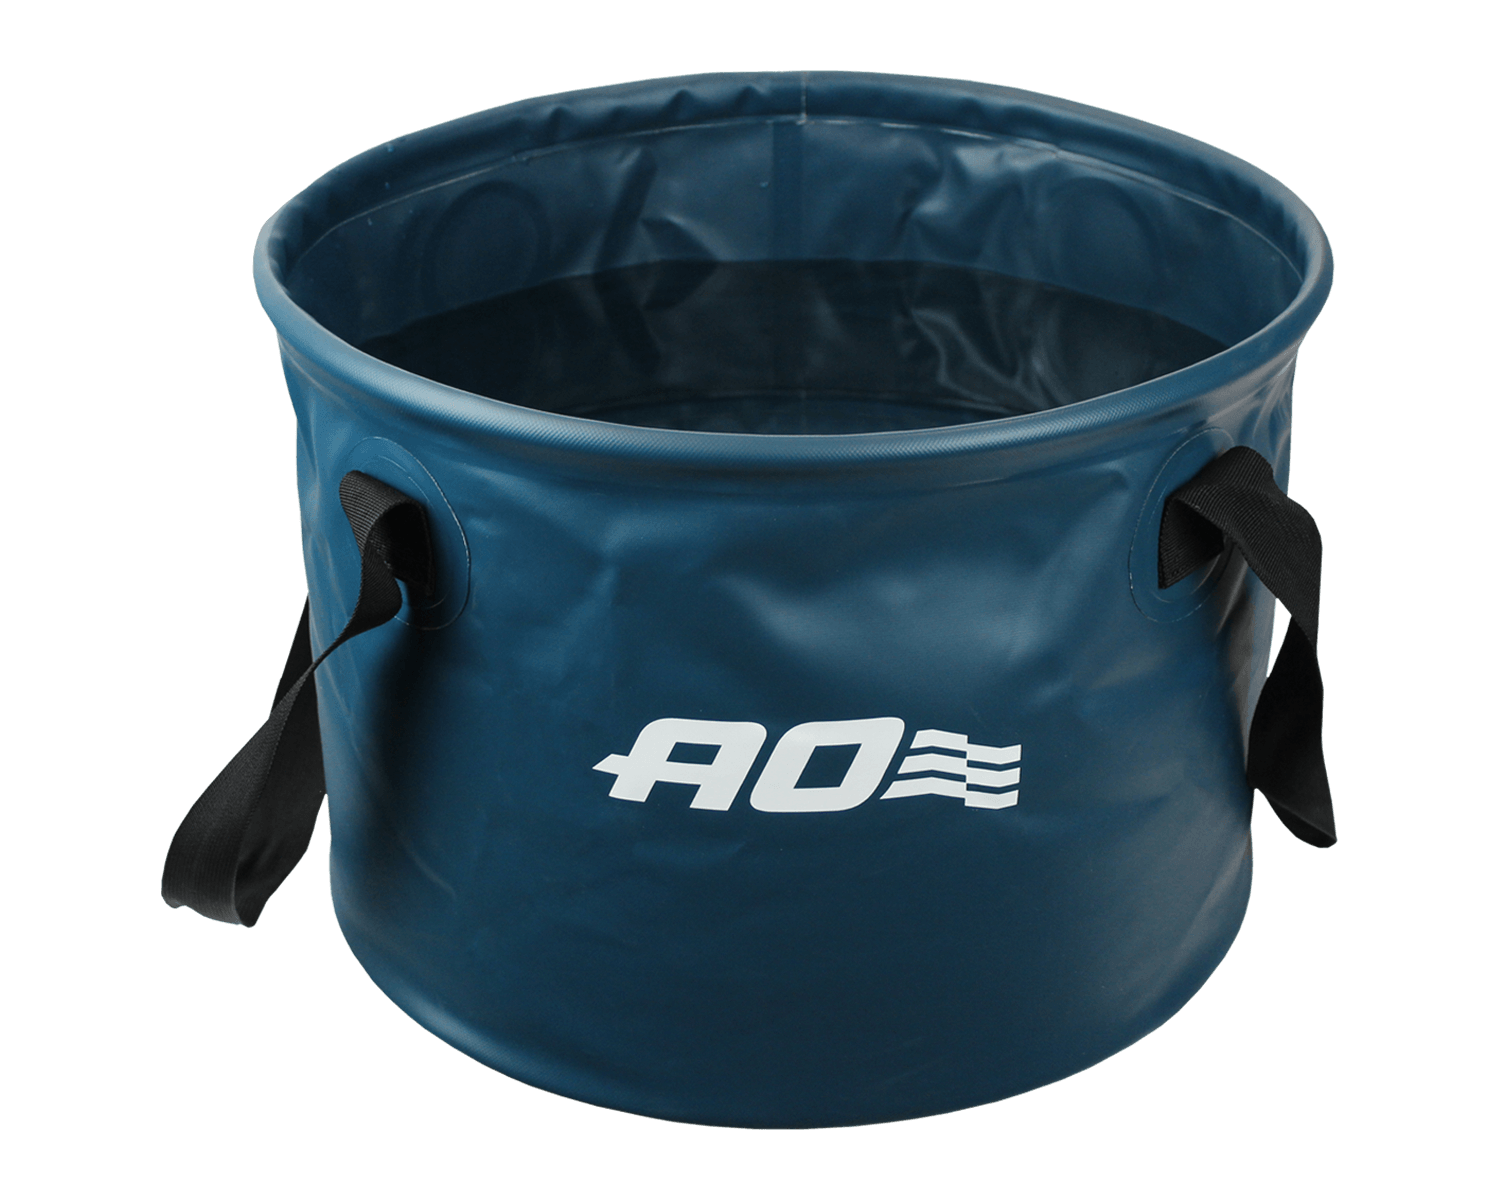 Ultimate Innovations by the DePalmas Collapsible Bucket in Coral